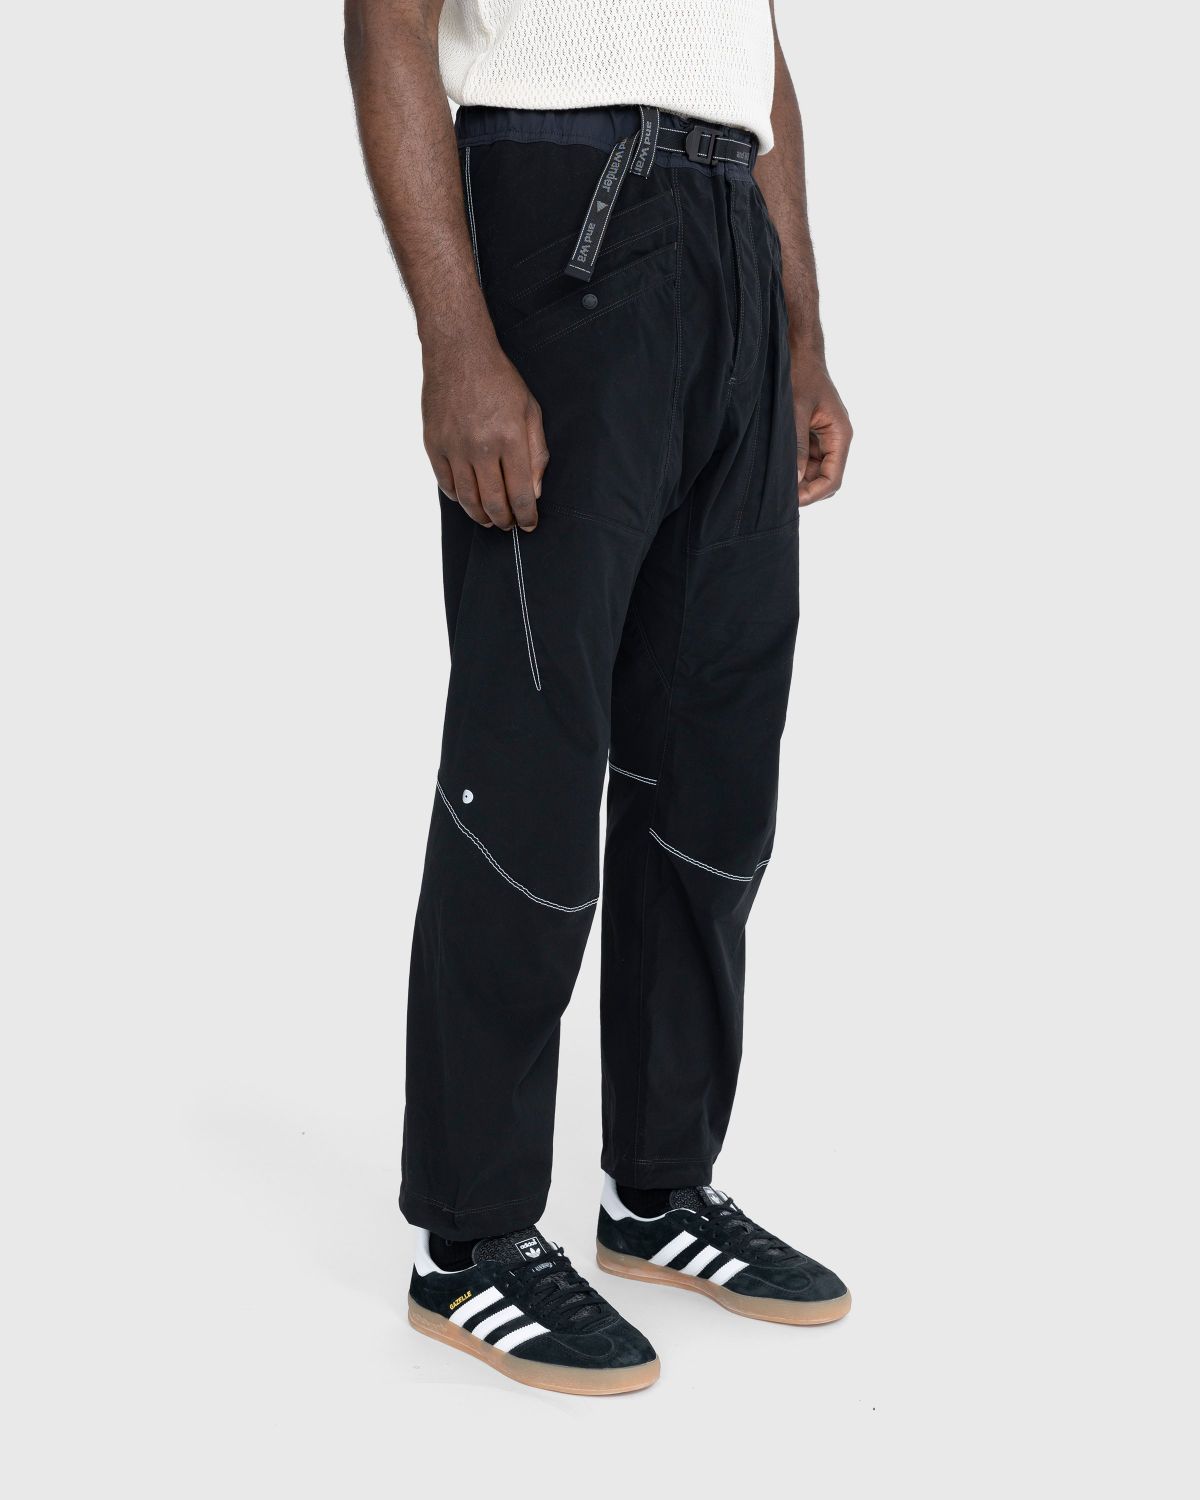 and wander Pocket Stretch Pants - Charcoal